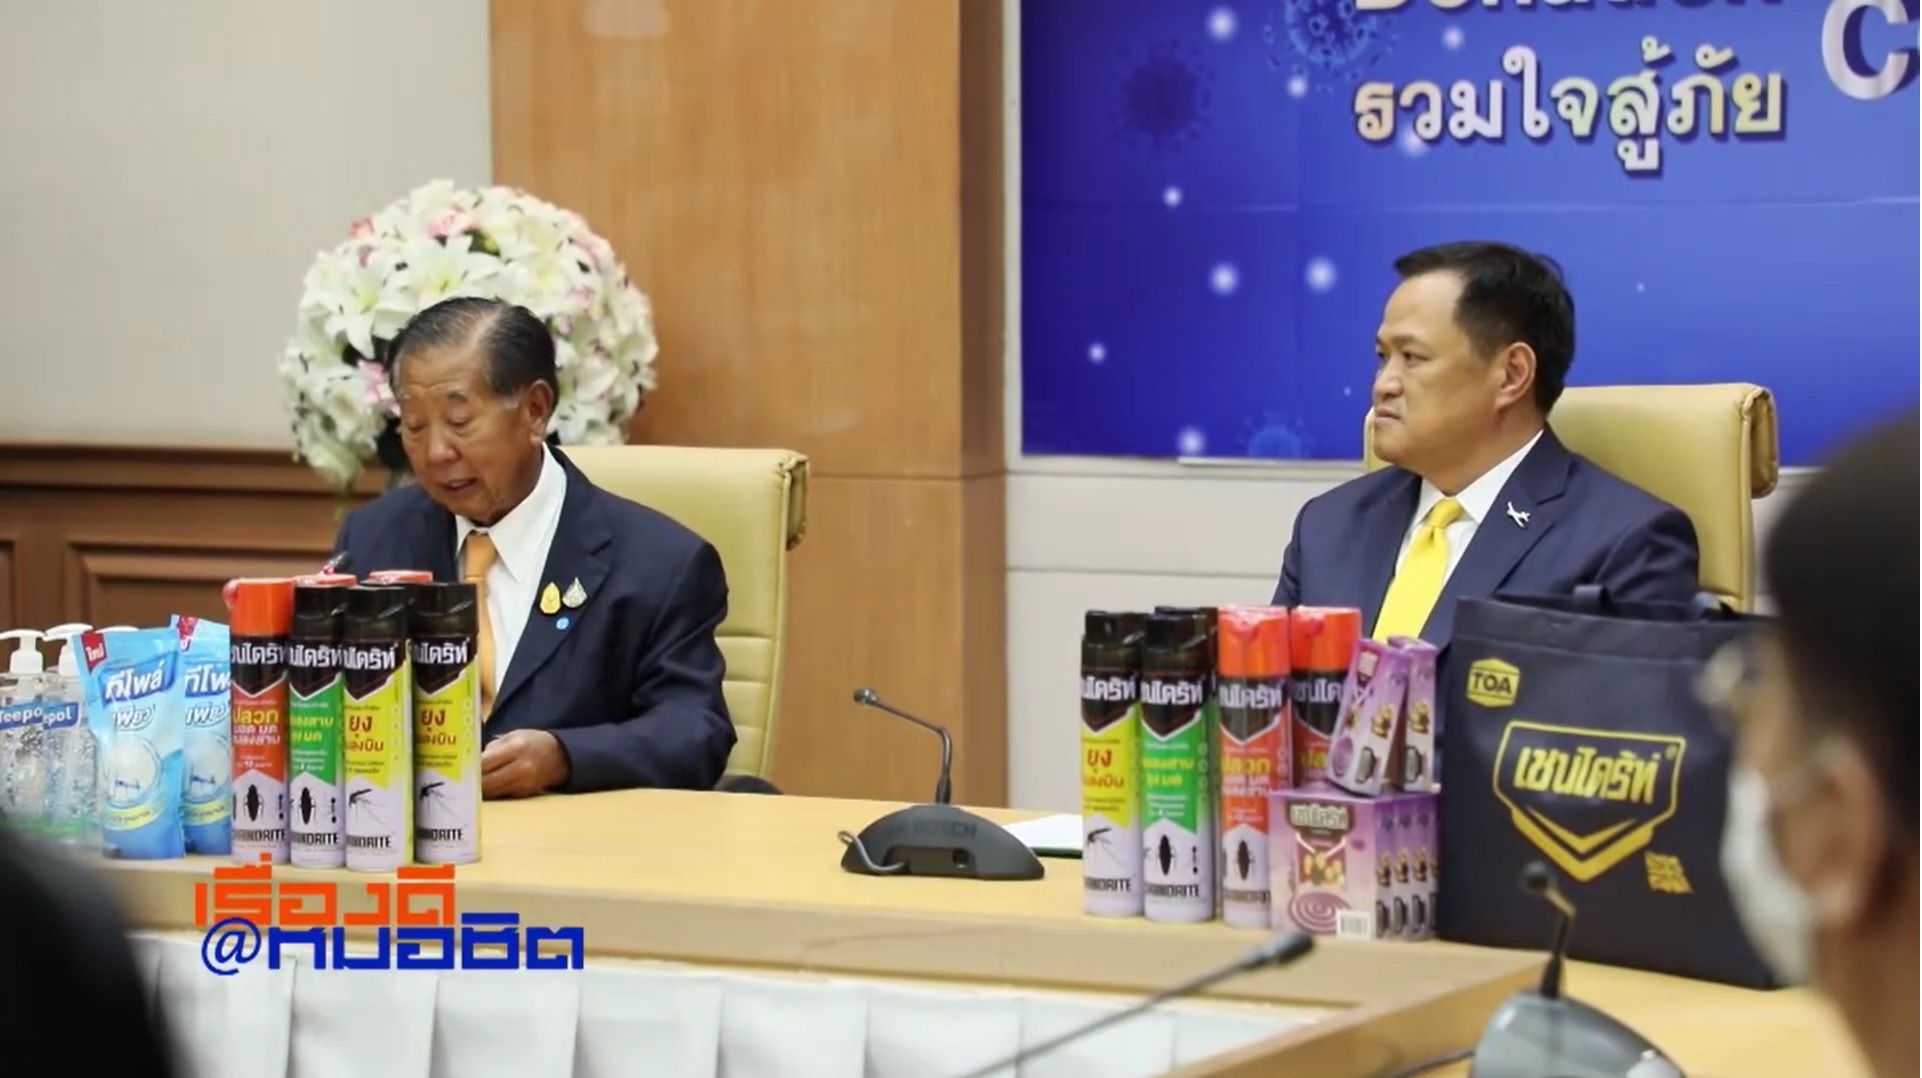 TOA Donates over 100 Million Baht to Help Vulnerable People Affected by Covid-19